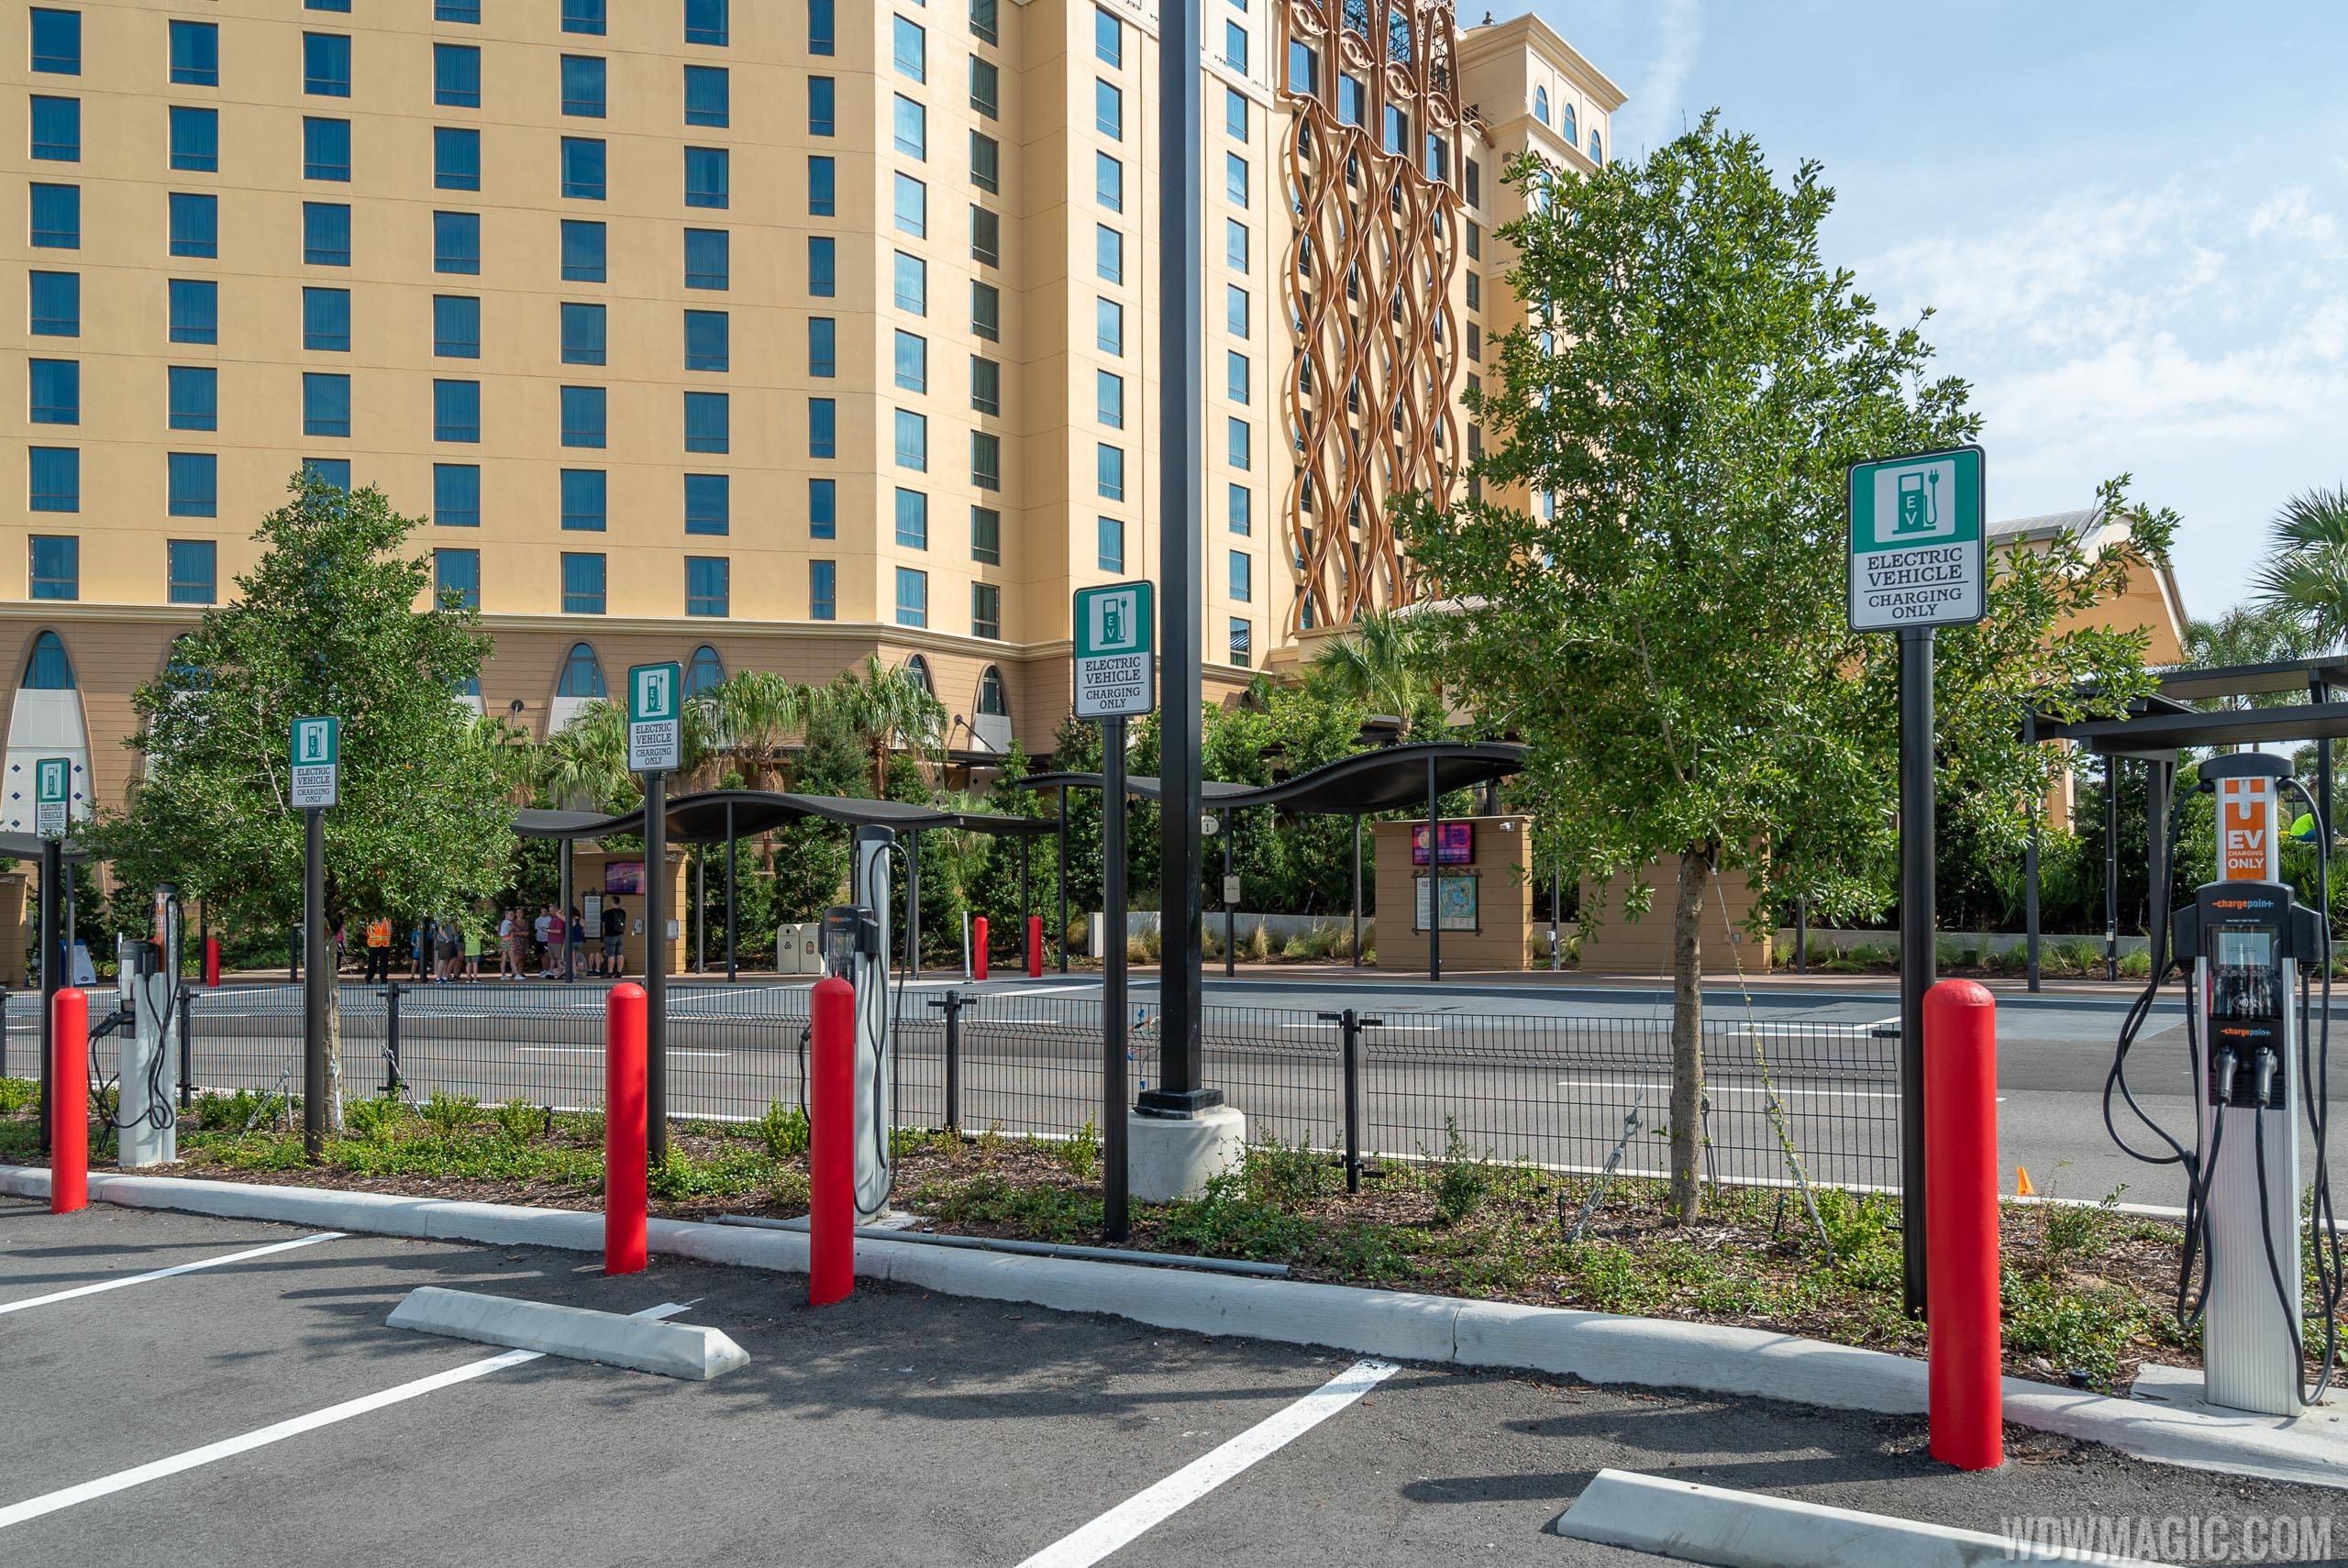 Chargepoint EV Electric Vehicle chargers at Disney's Coronado Springs Resort